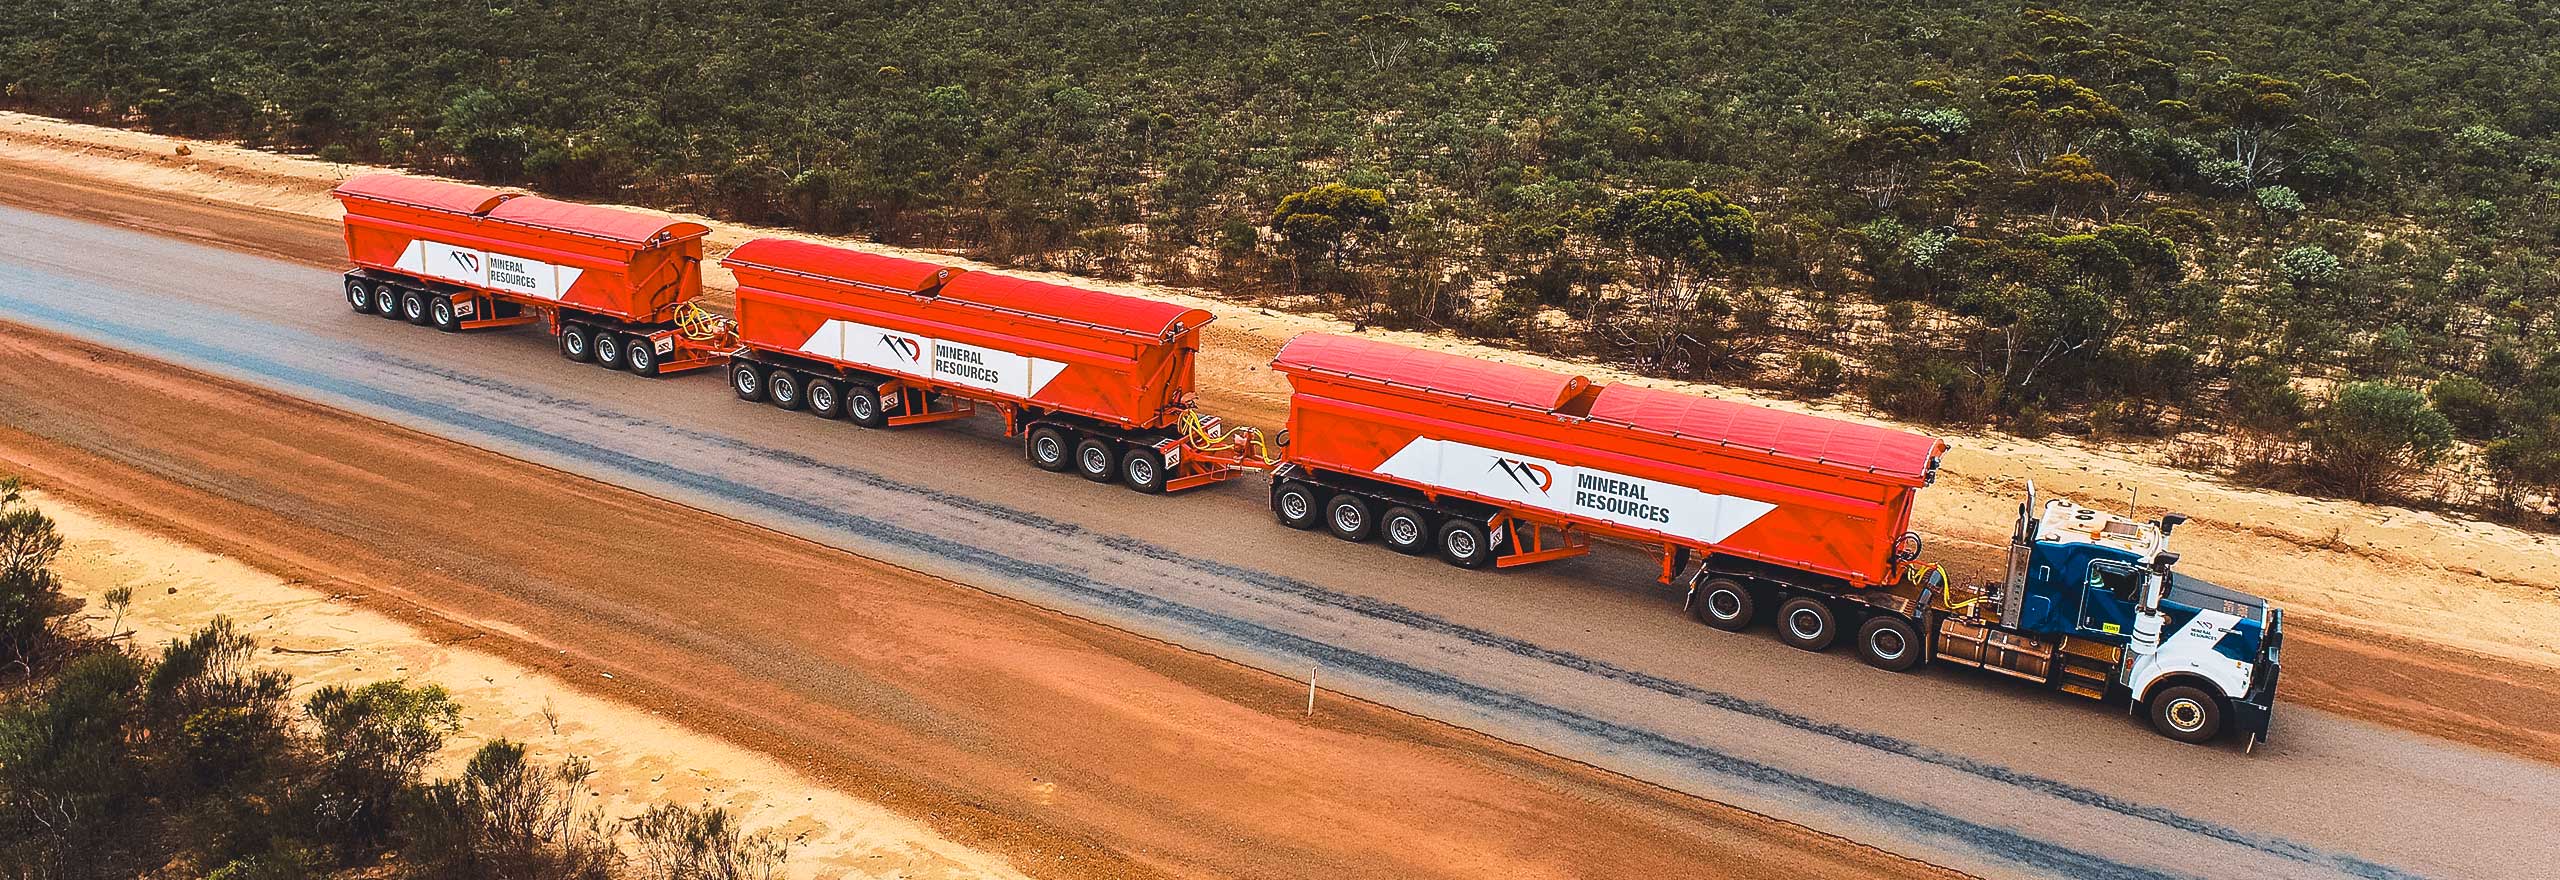 Equipping the world’s first autonomous road trains